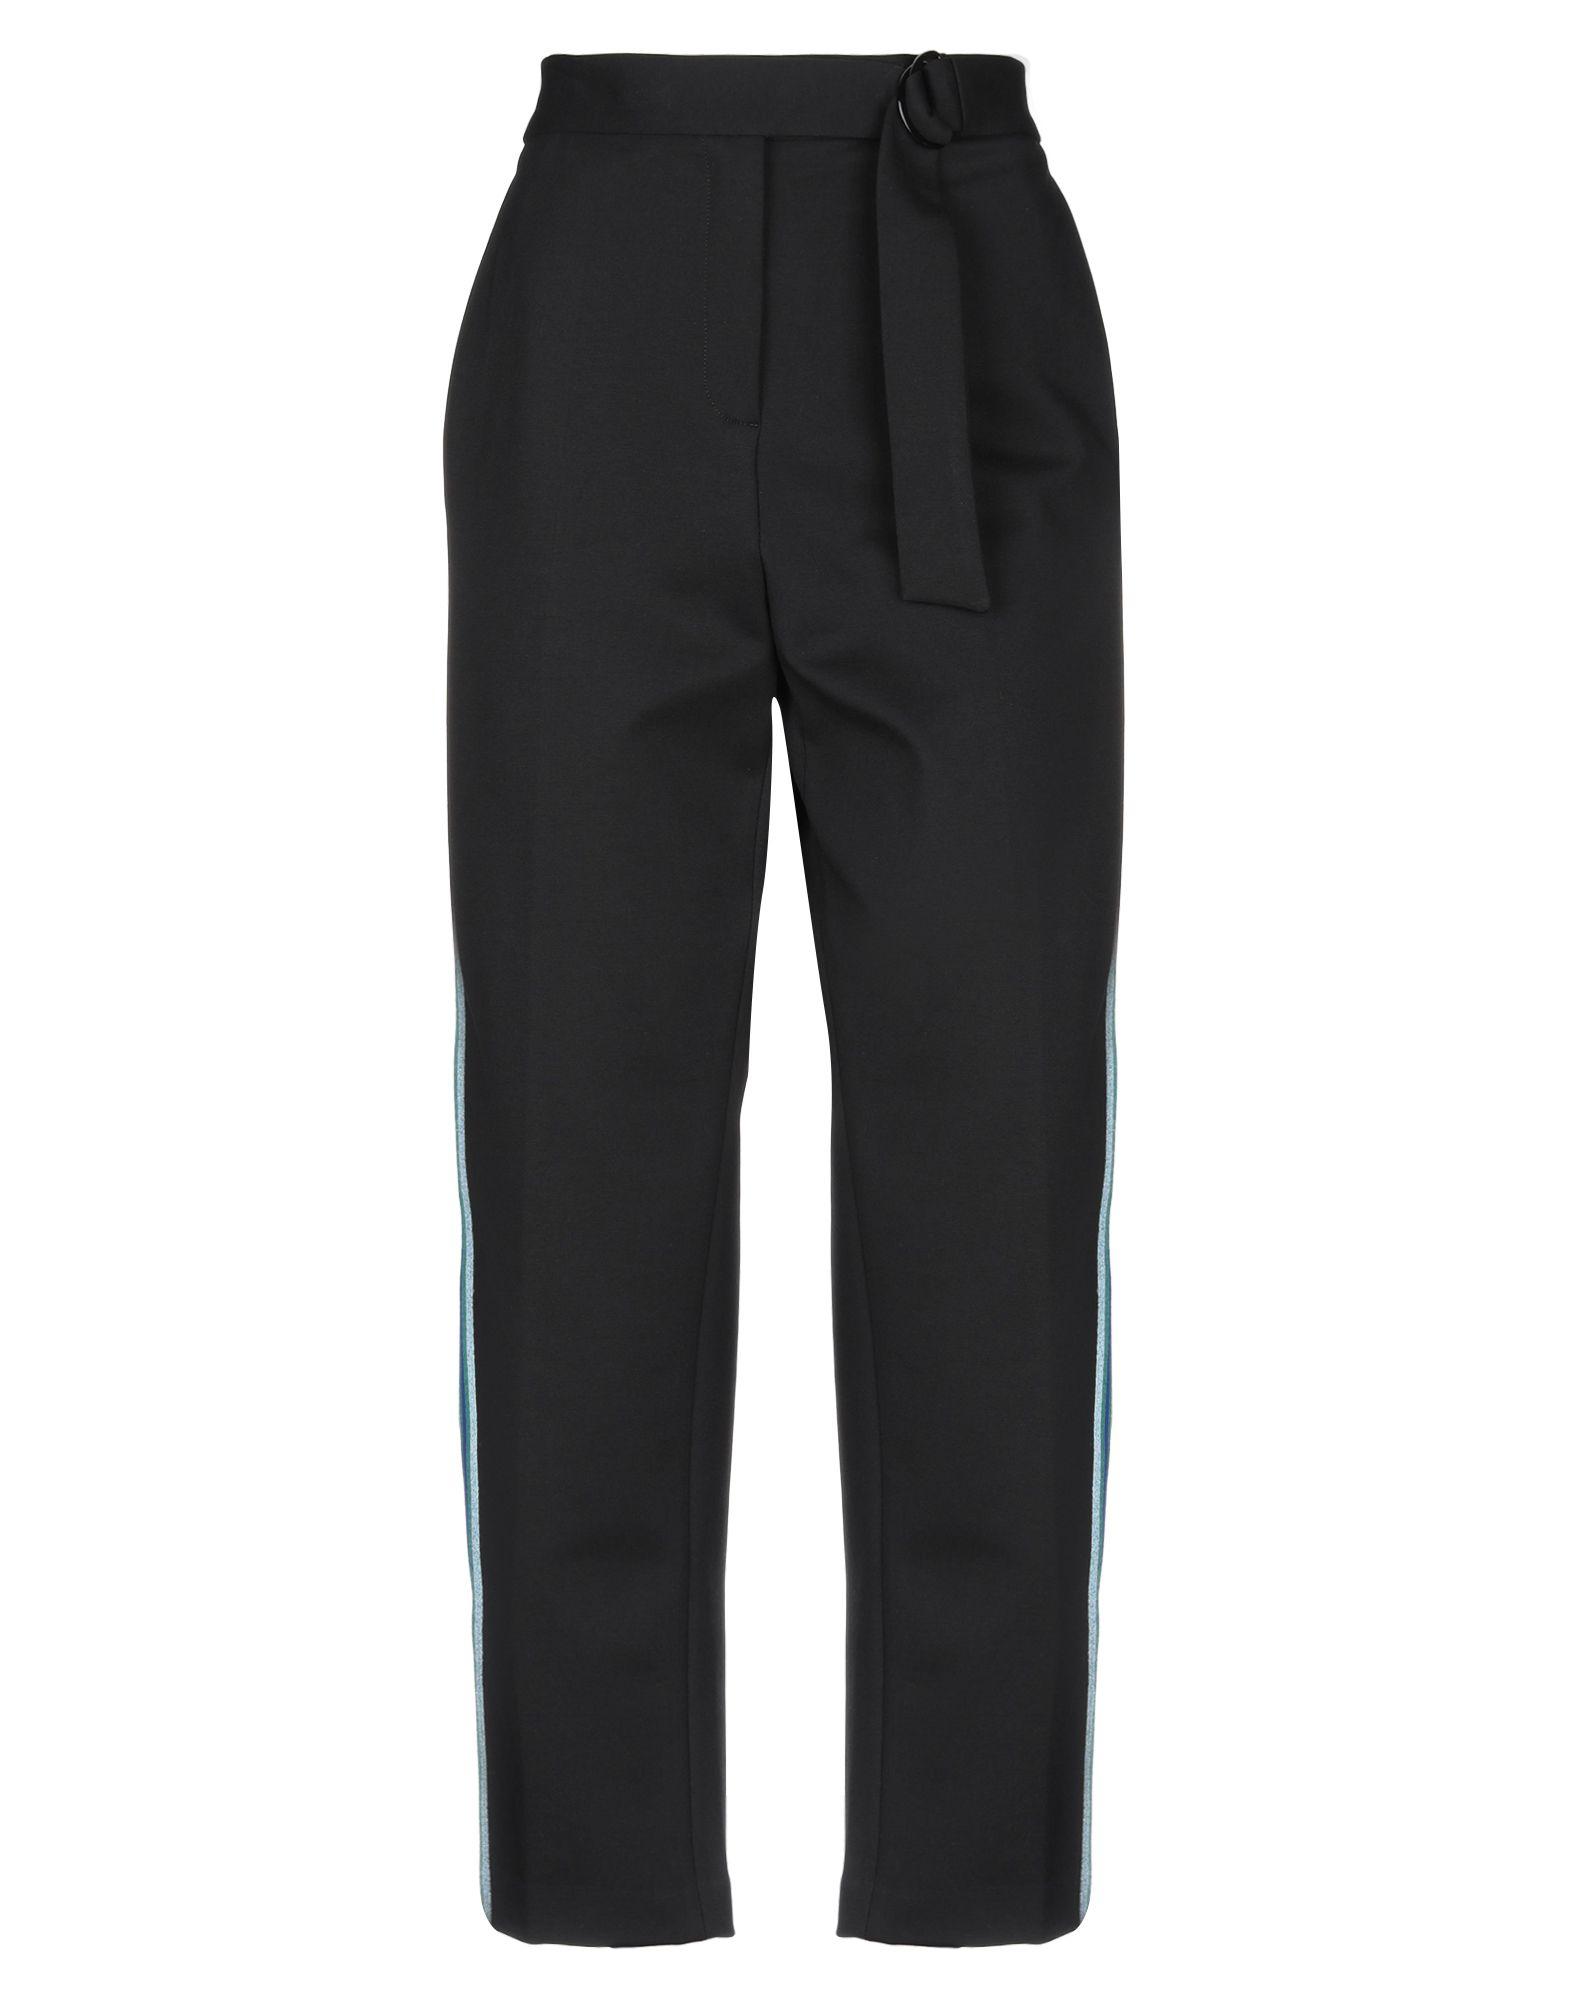 Sandro Synthetic Casual Pants in Black - Lyst